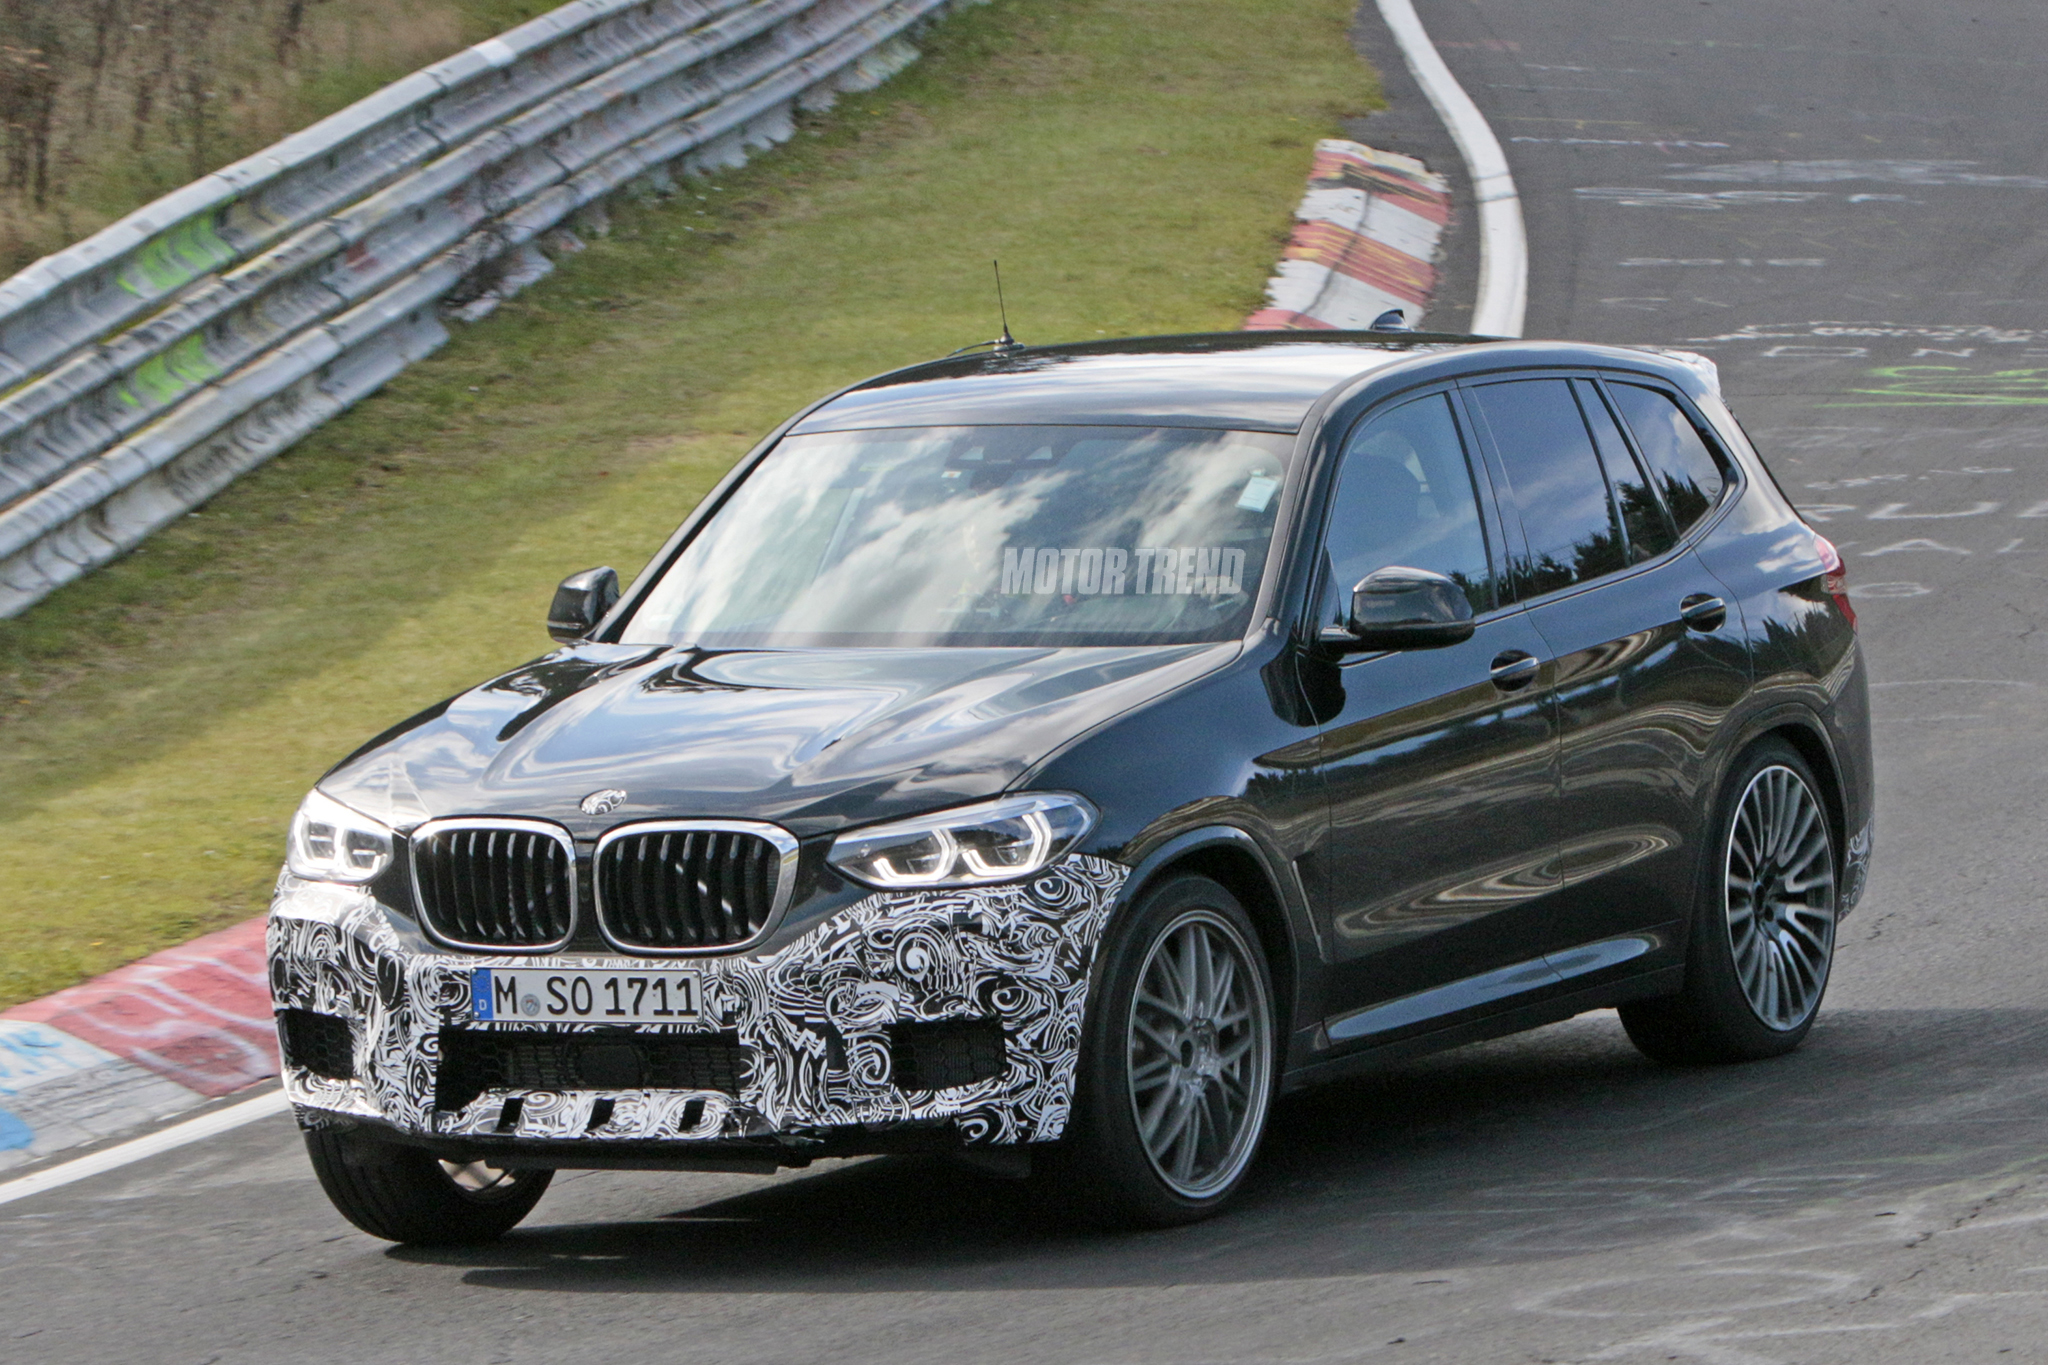 [Spy Photos] Upcoming BMW X3 M With Not Much Camo